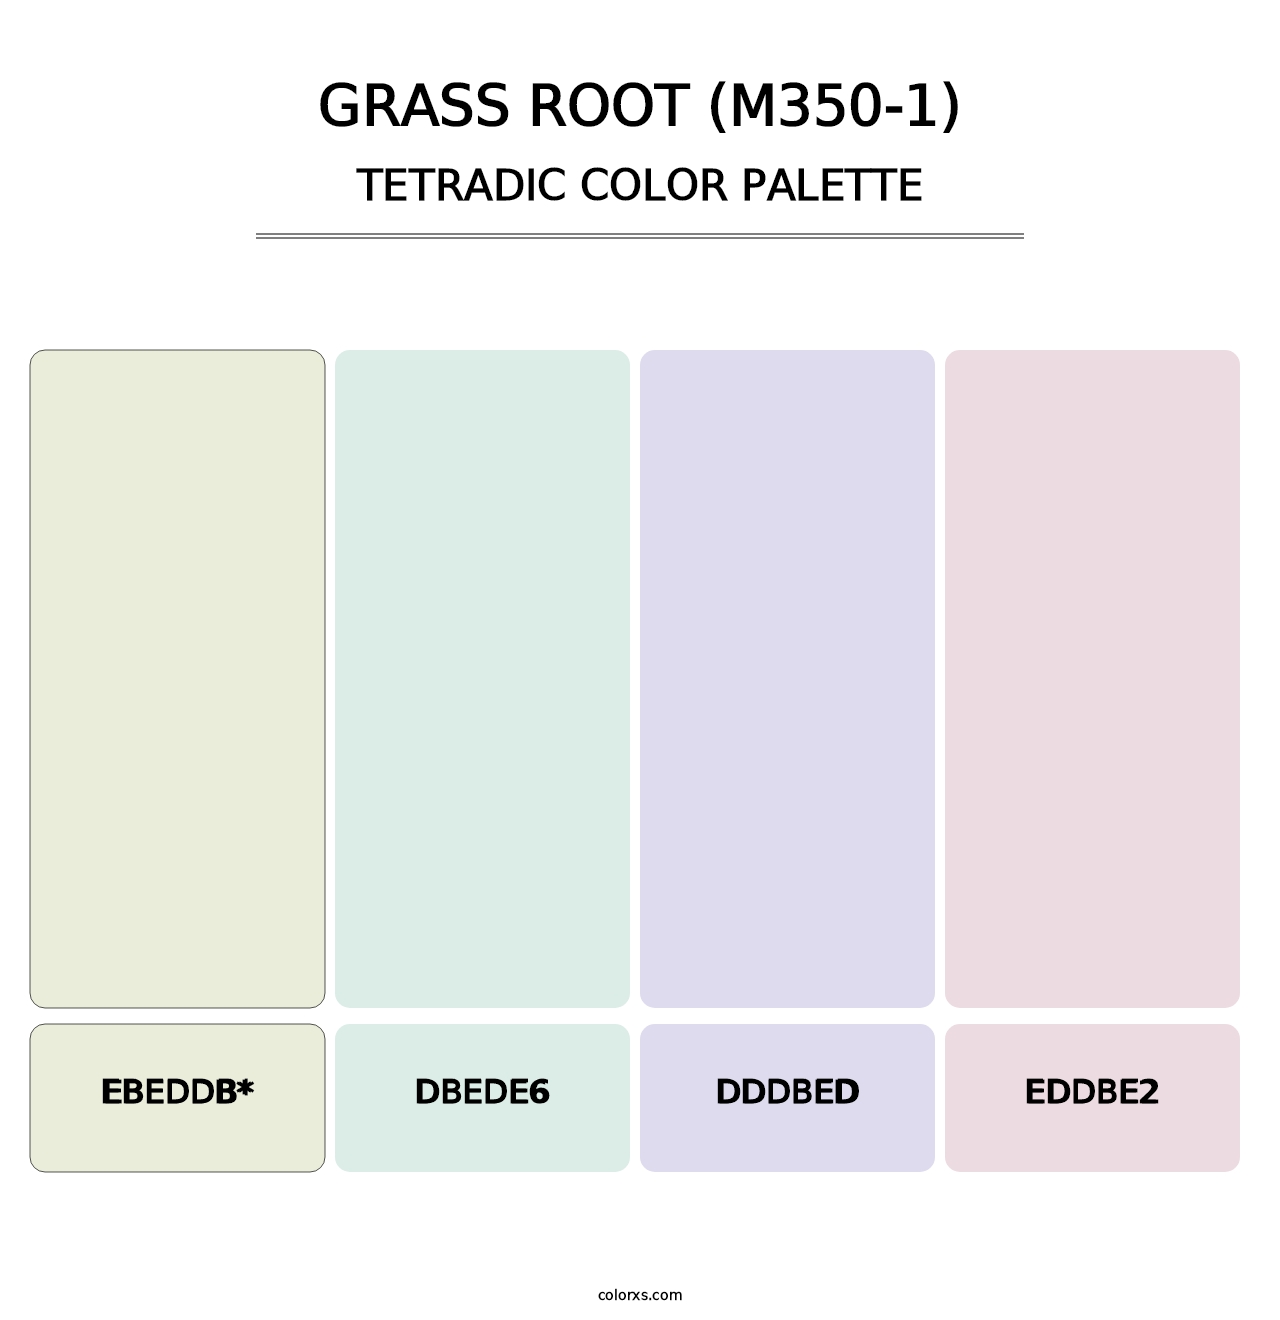 Grass Root (M350-1) - Tetradic Color Palette